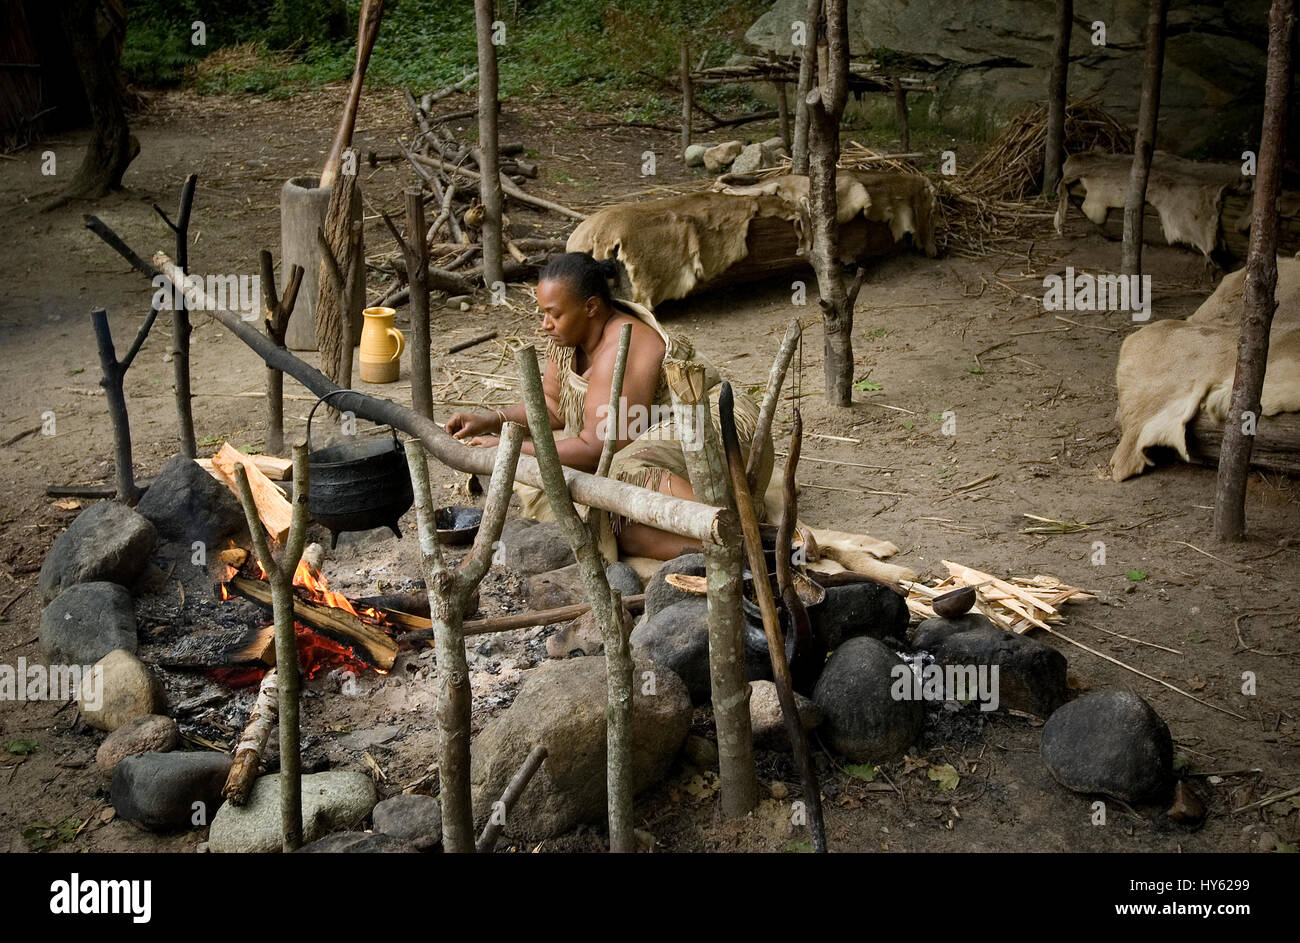 Food preparation at the Native American encampment at Plimoth Plantation, Plymouth, Massachusetts Now known as Plimoth Pataxet Stock Photo